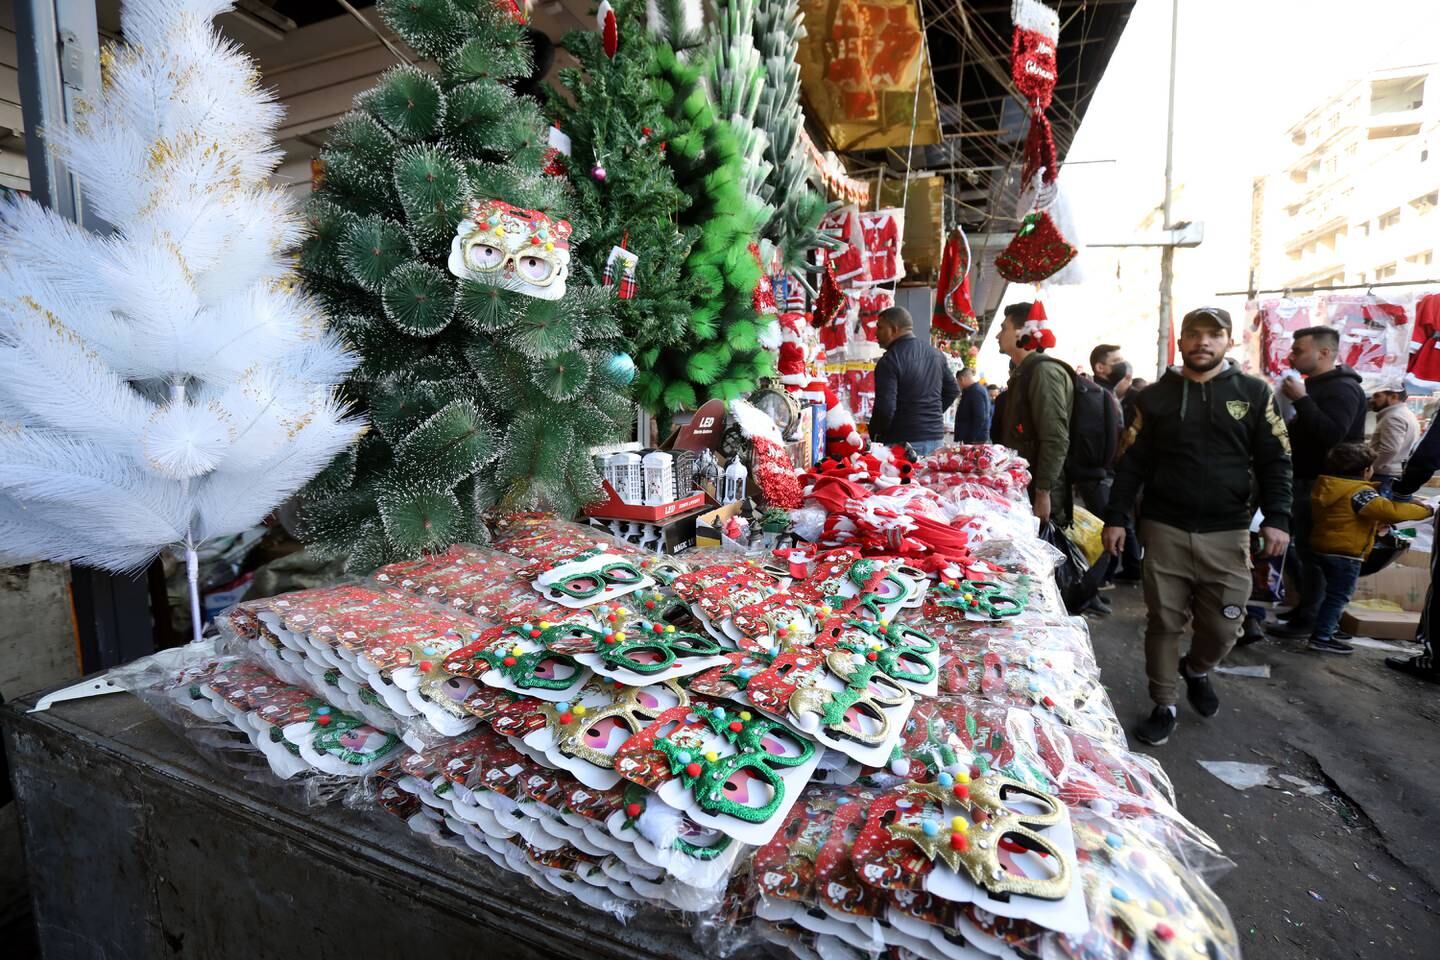 Iraqis walk past Christmas goods being sold at a street shop in Baghdad, Iraq, December 22, 2021. EPA